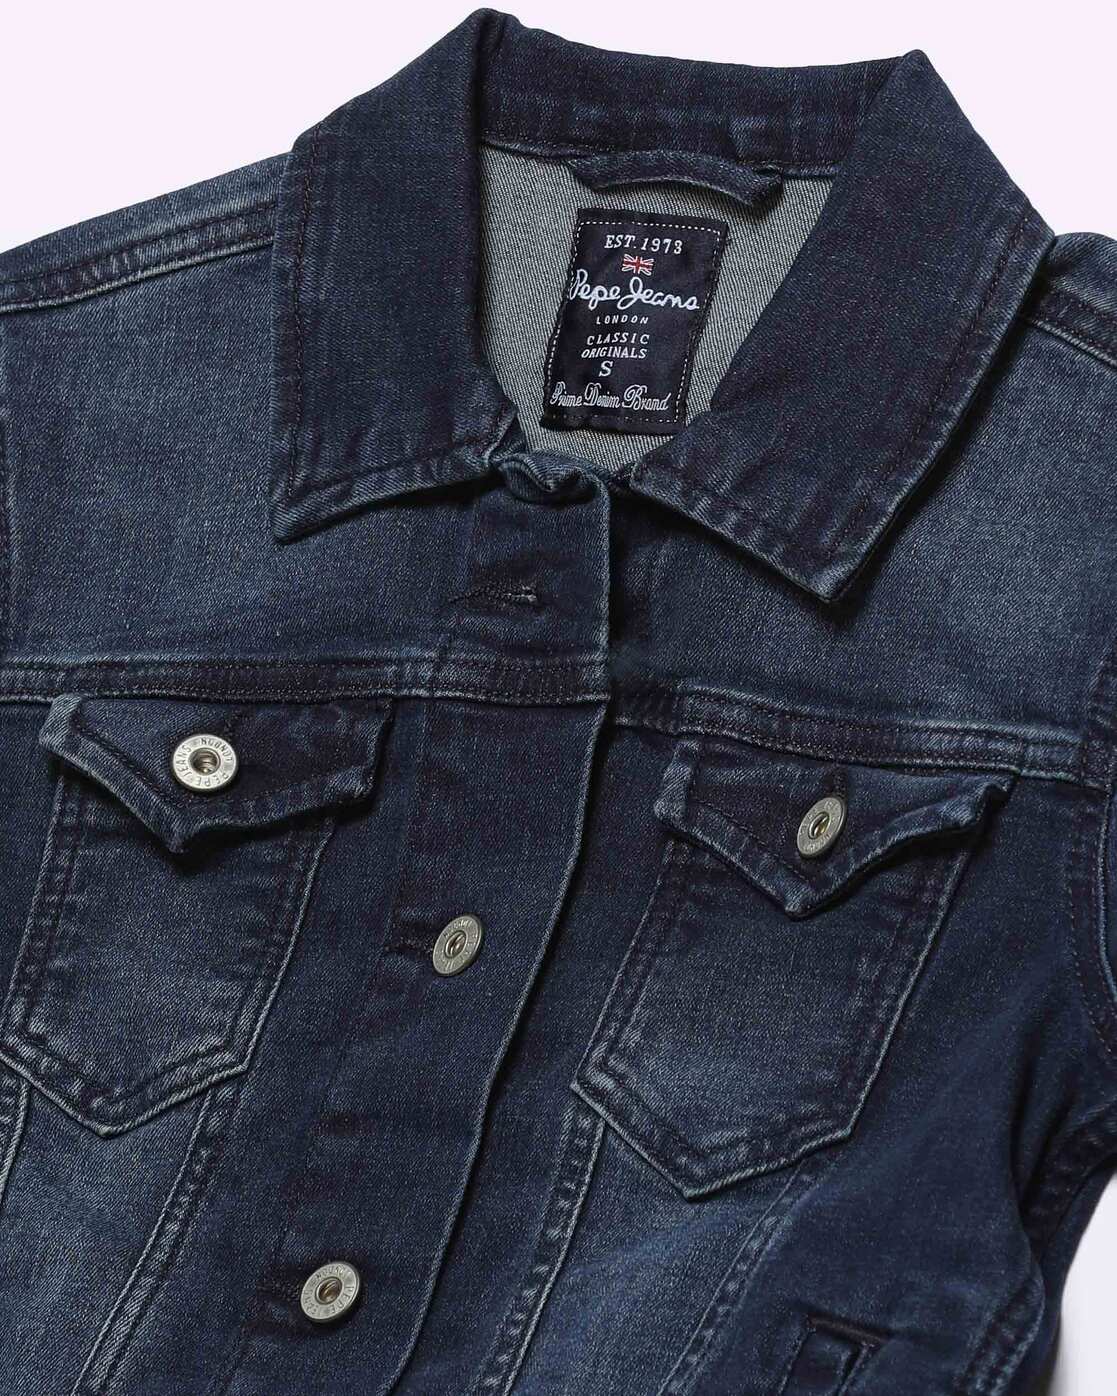 Pepe Jeans London Denim jackets for women online - Buy now at Boozt.com